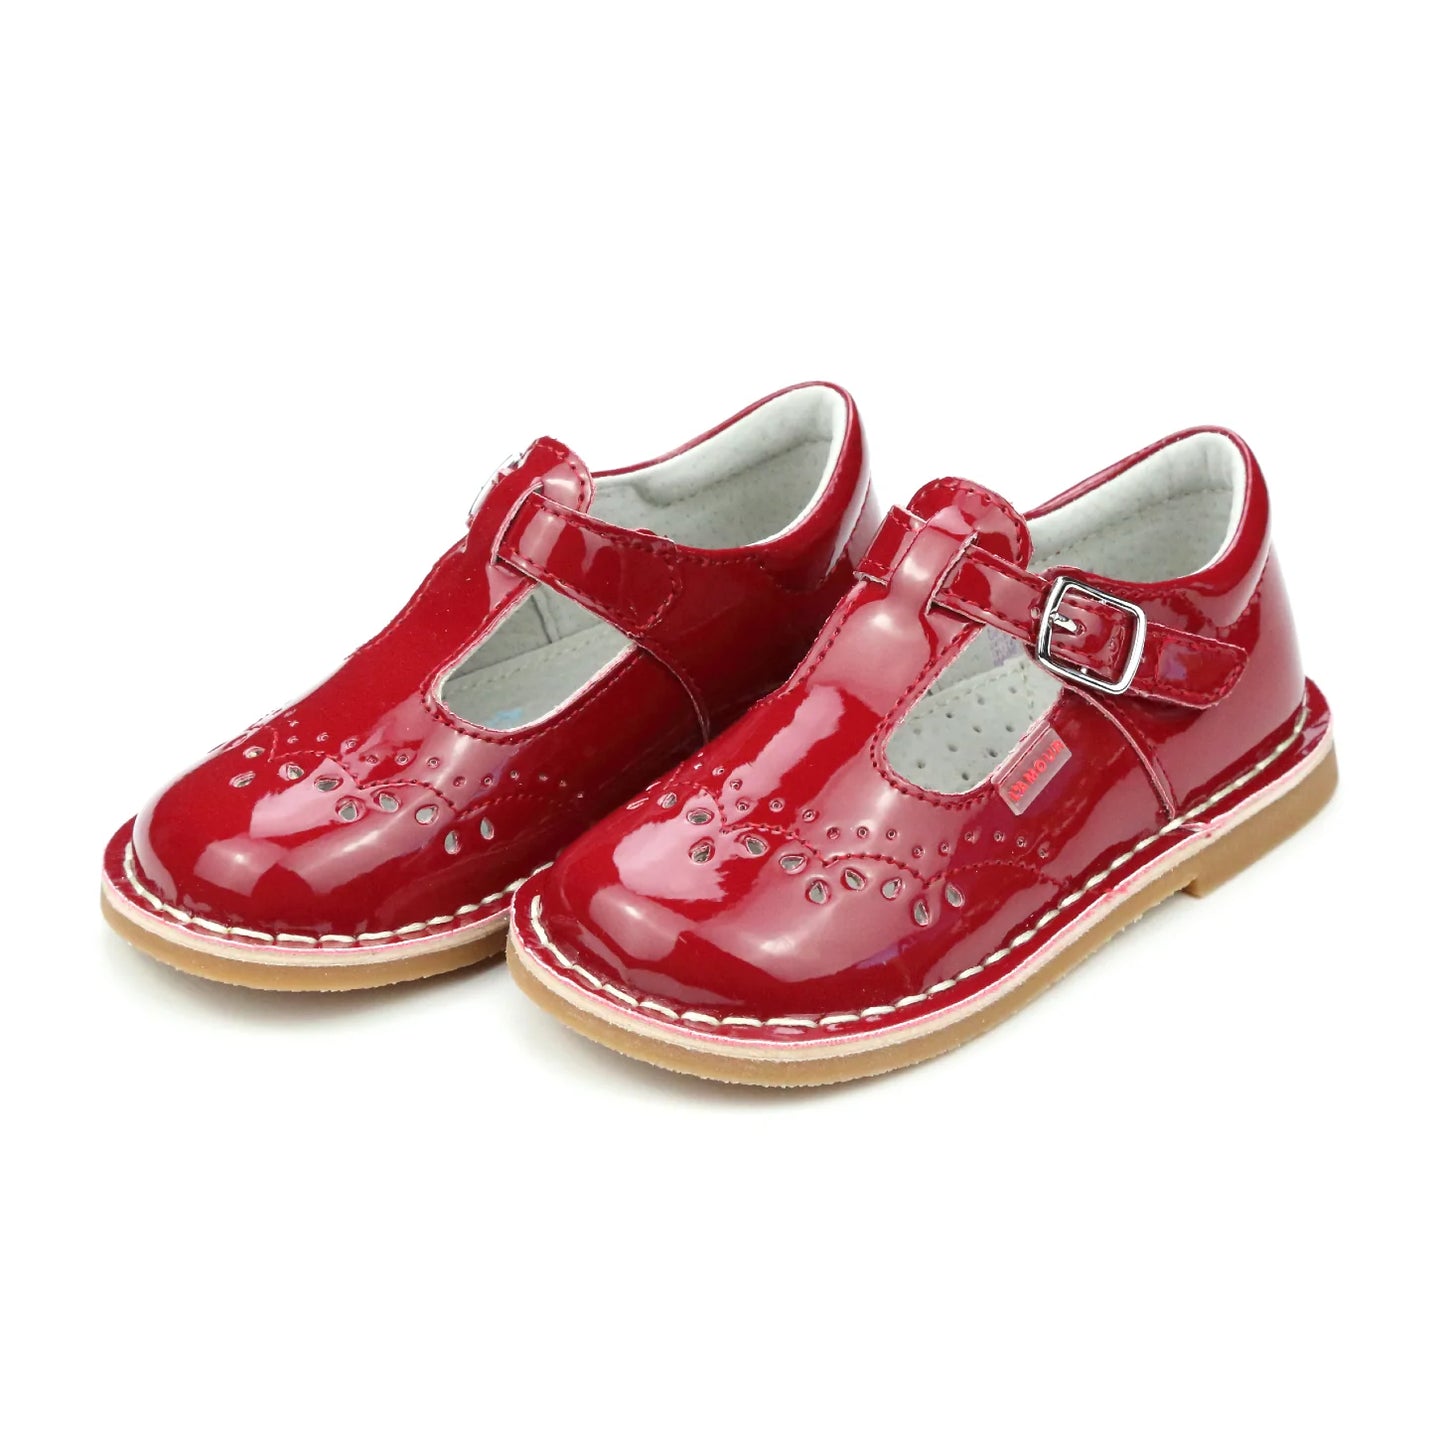 L'amour Ruthie Stiched Mary Jane - Patent Red